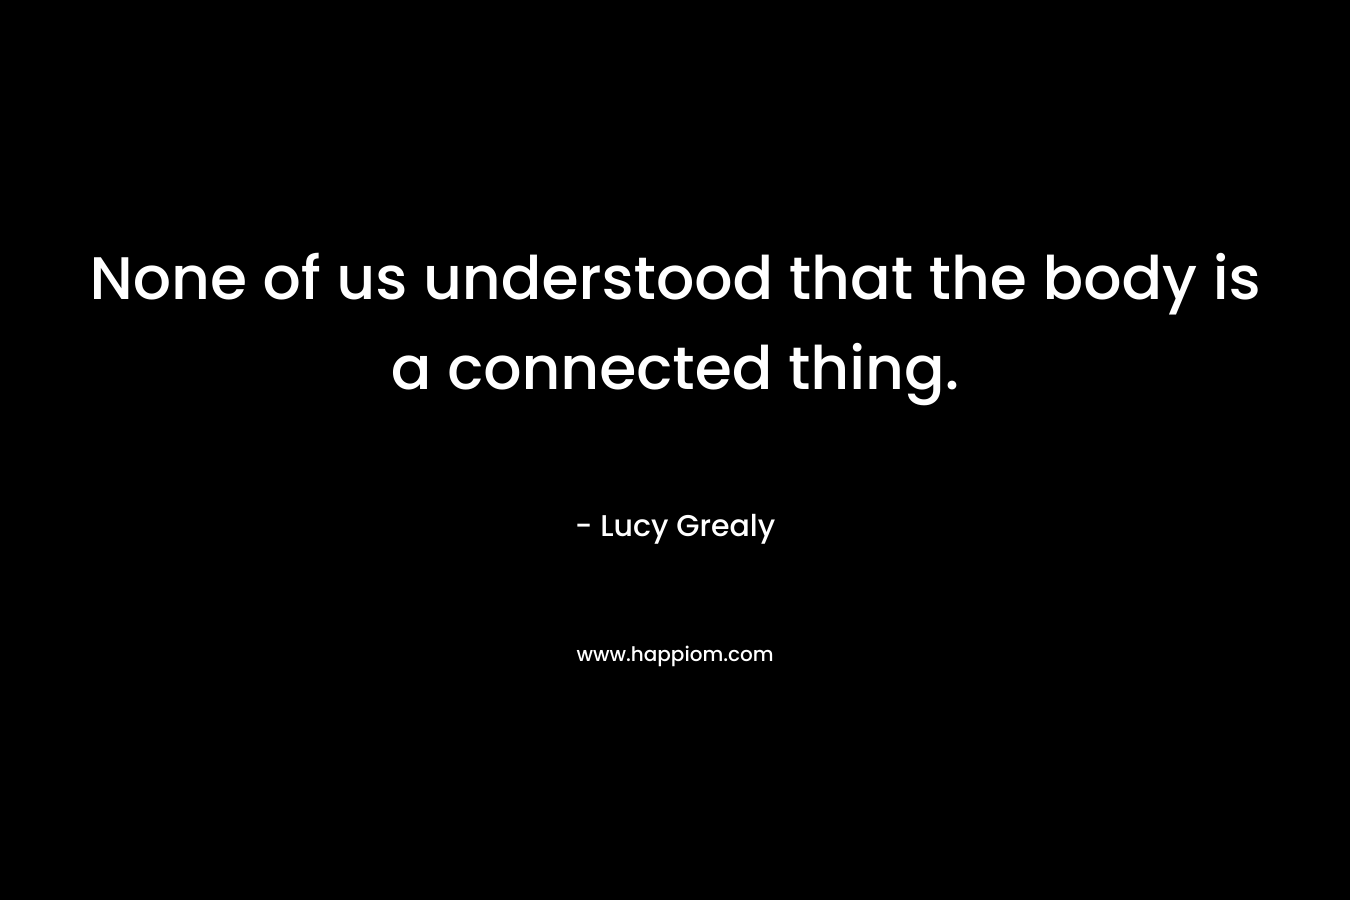 None of us understood that the body is a connected thing. – Lucy Grealy